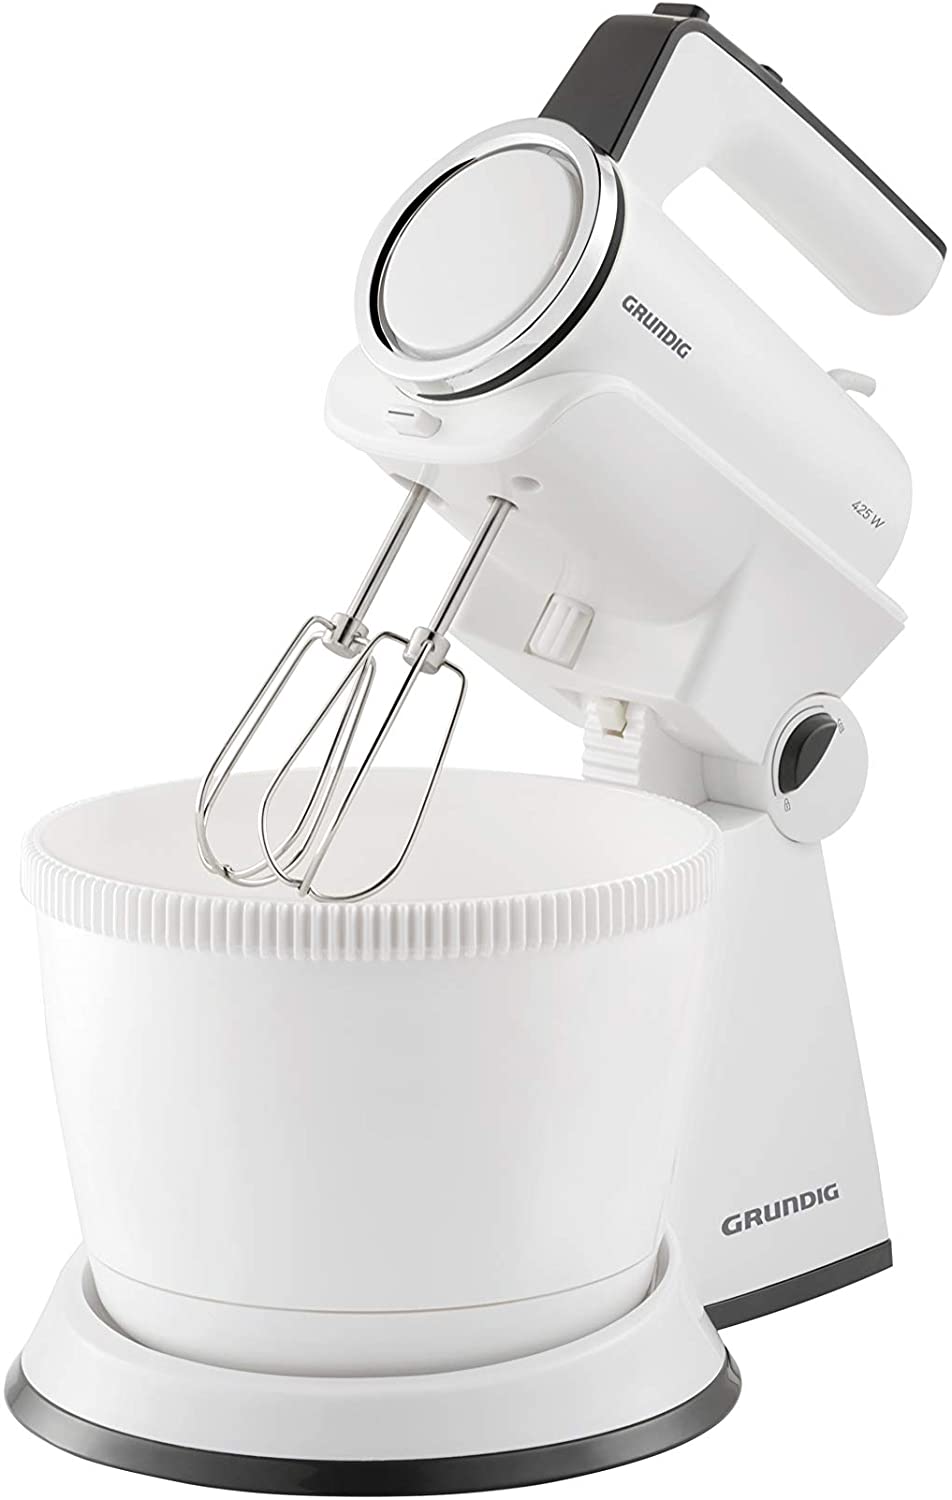 Grundig HM 6860 Hand Mixer with 4 Litre Mixing Bowl, 4 Levels, 425 W, White/Black